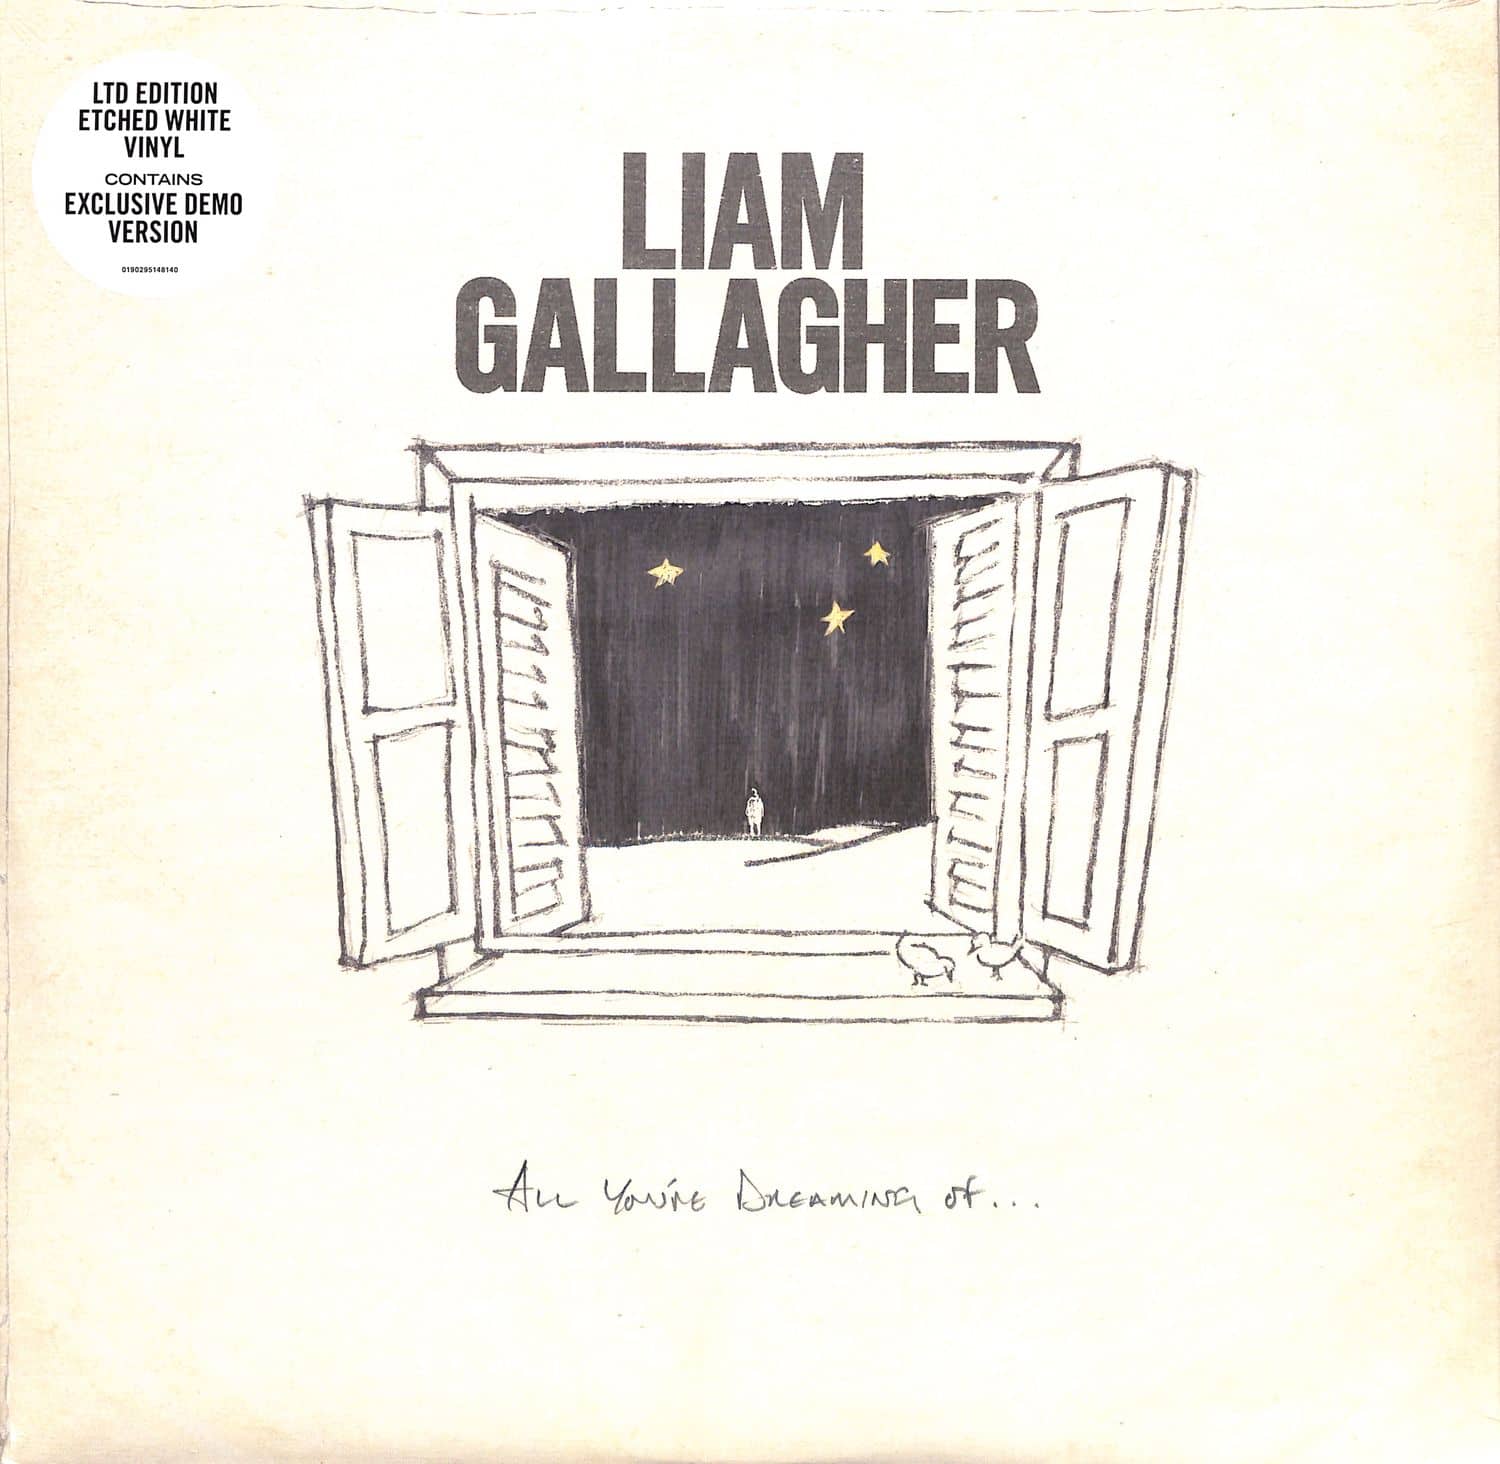 Liam Gallagher - ALL YOURE DREAMING OF 